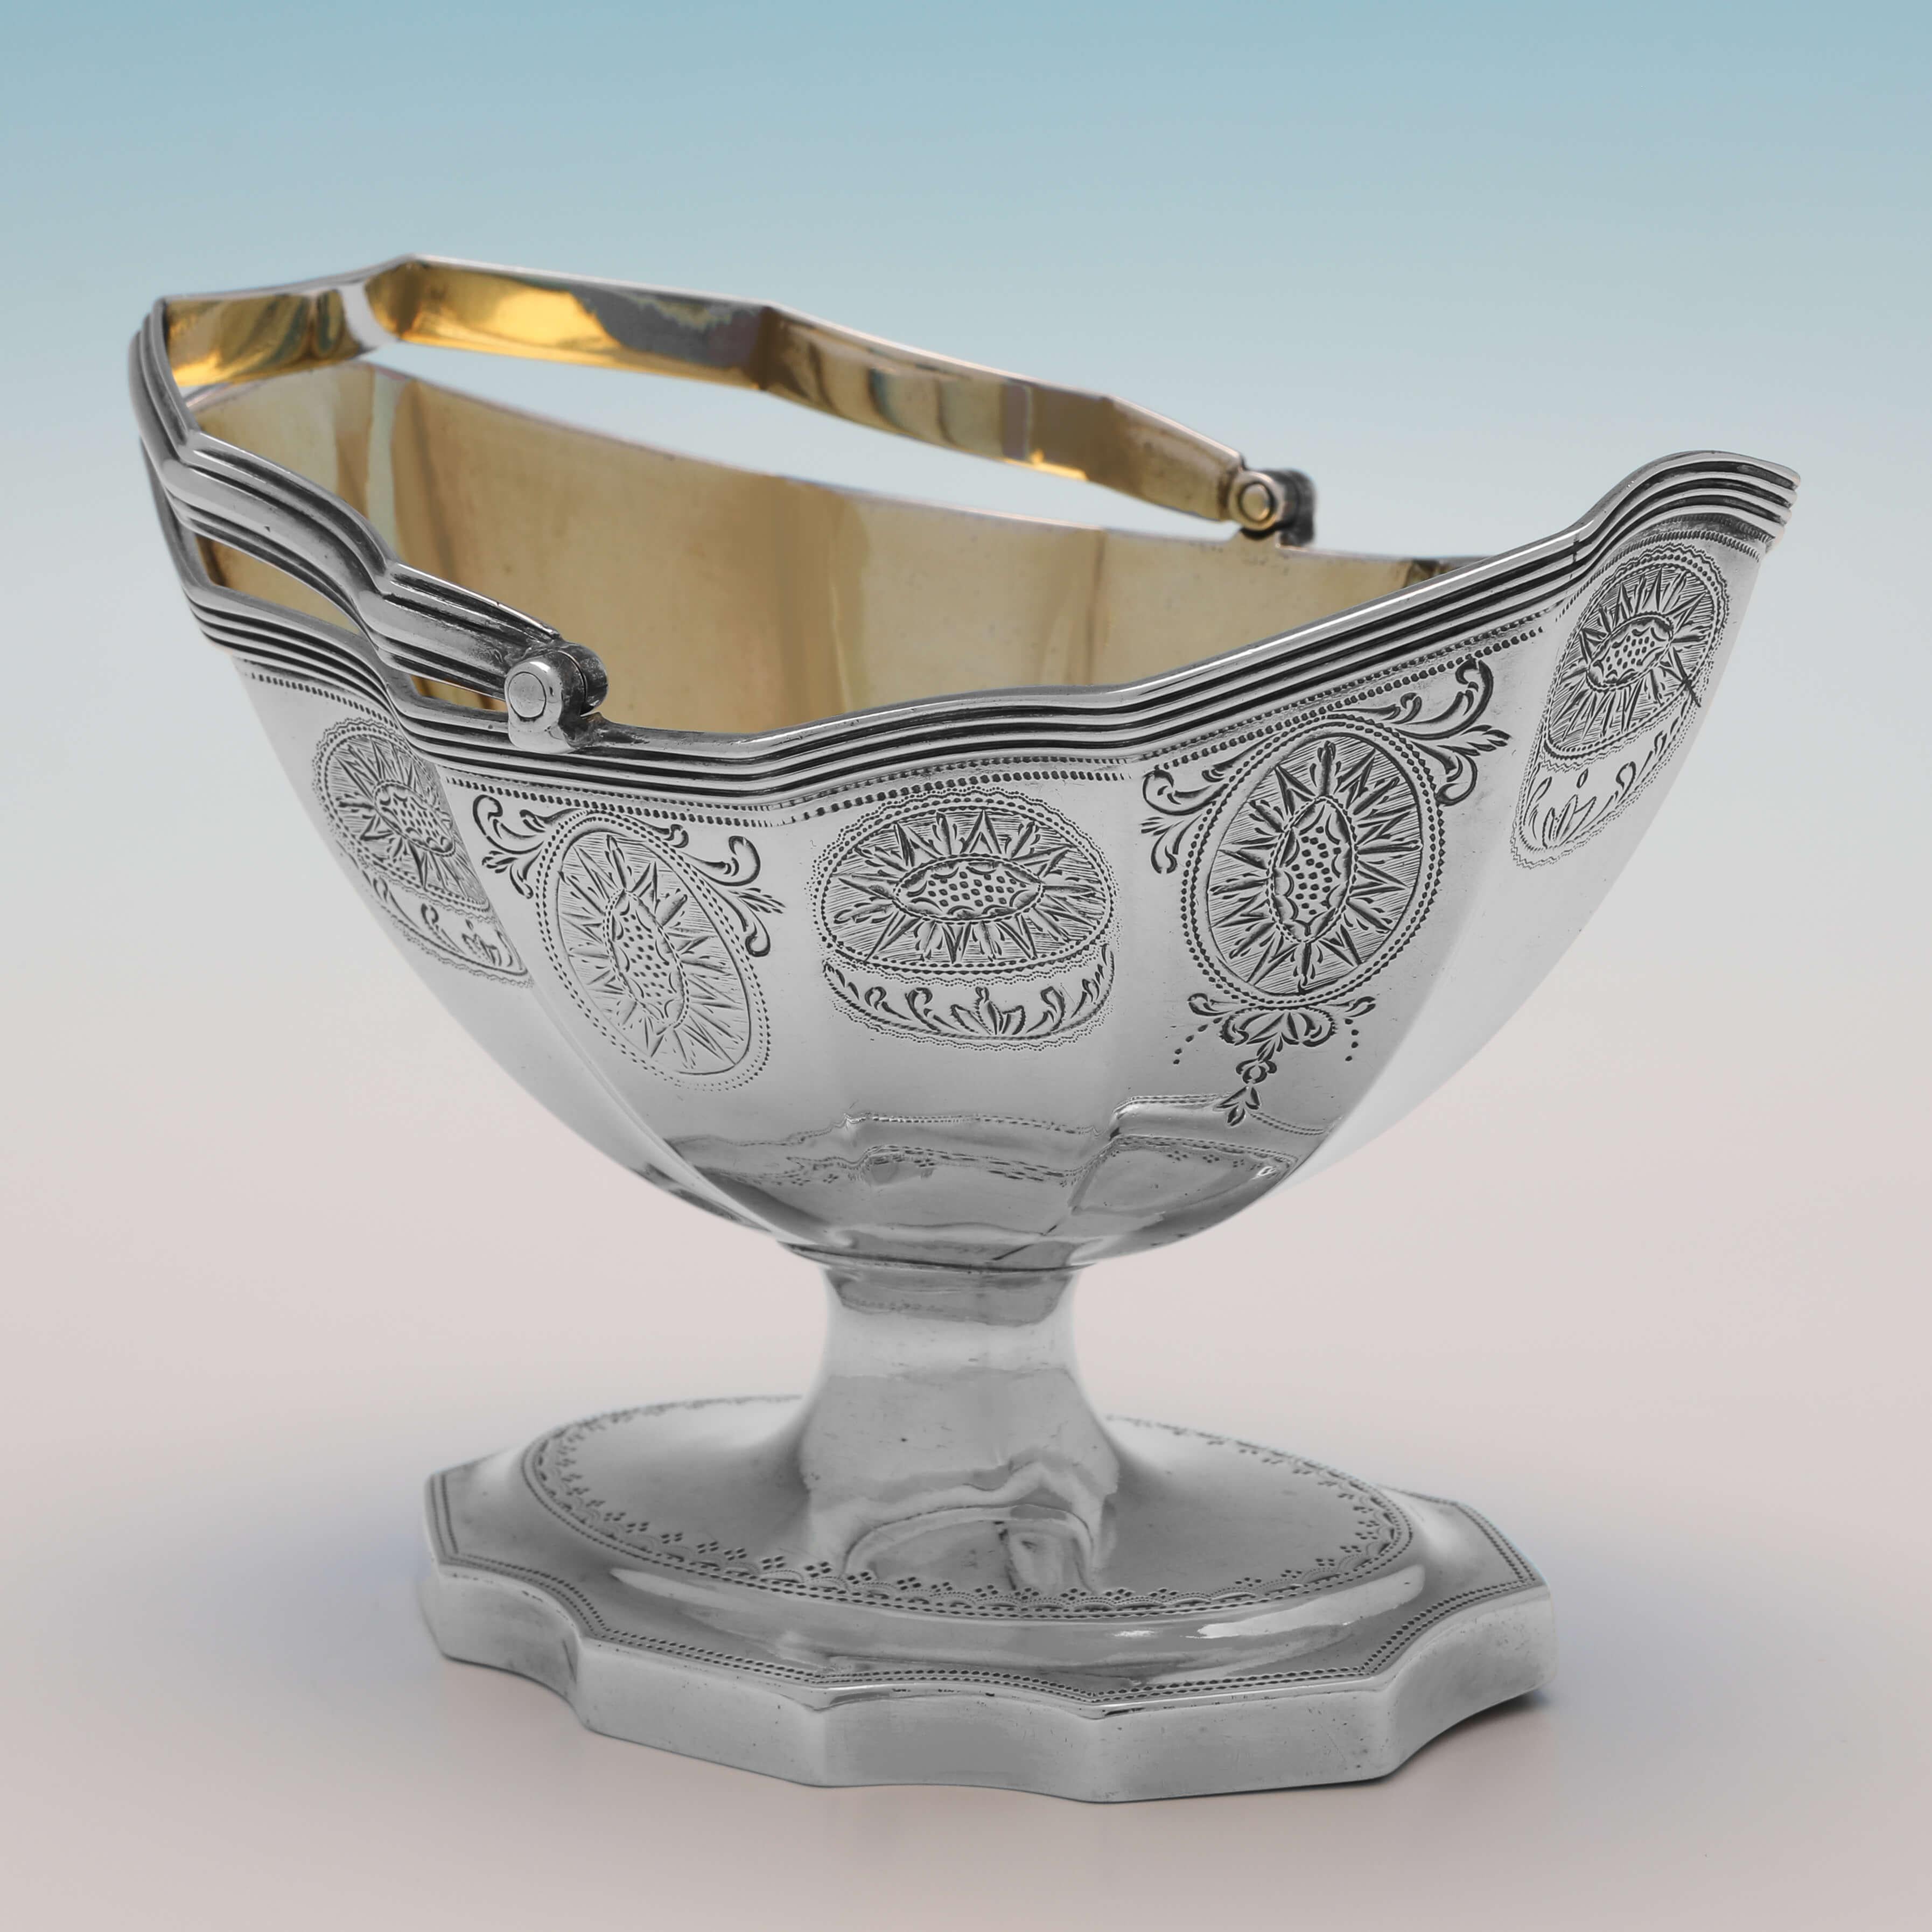 English Neoclassical George III Period Antique Sterling Silver Sugar Basket, 1792